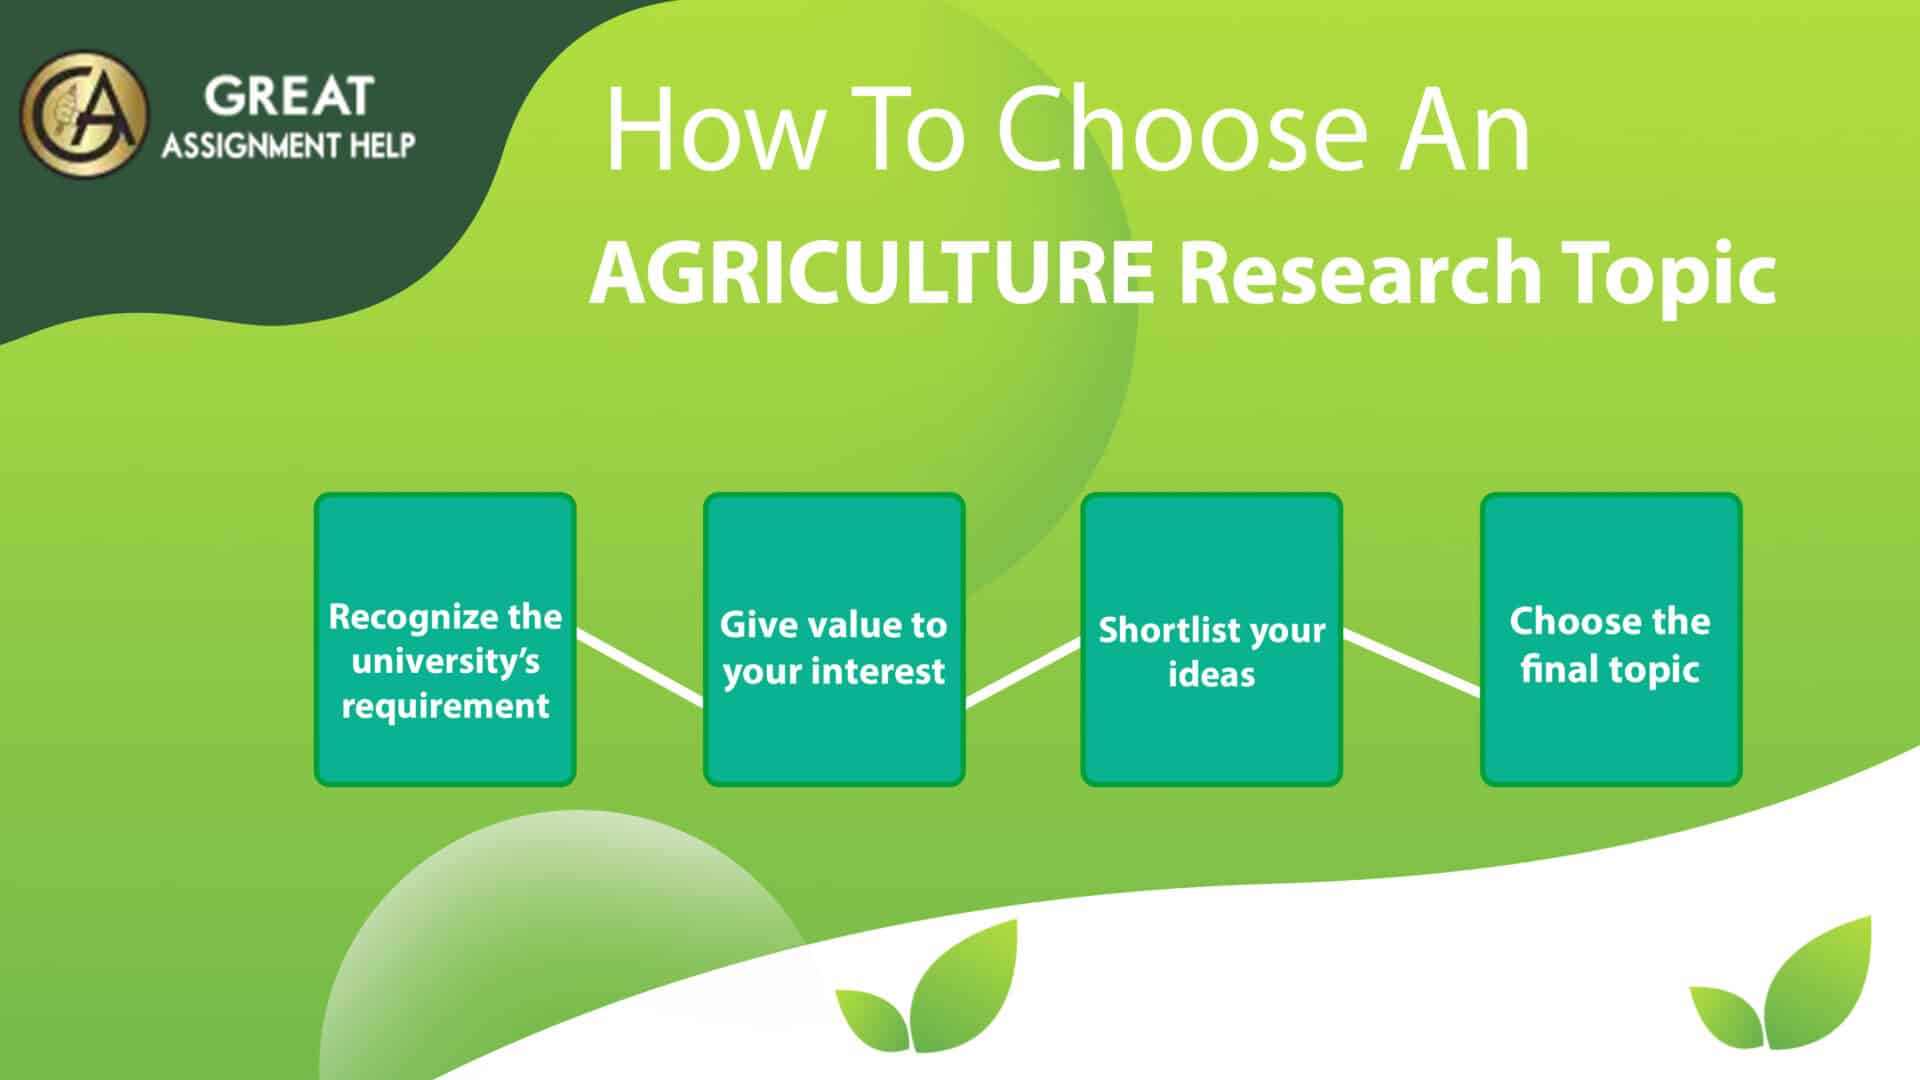 a research topic in agriculture